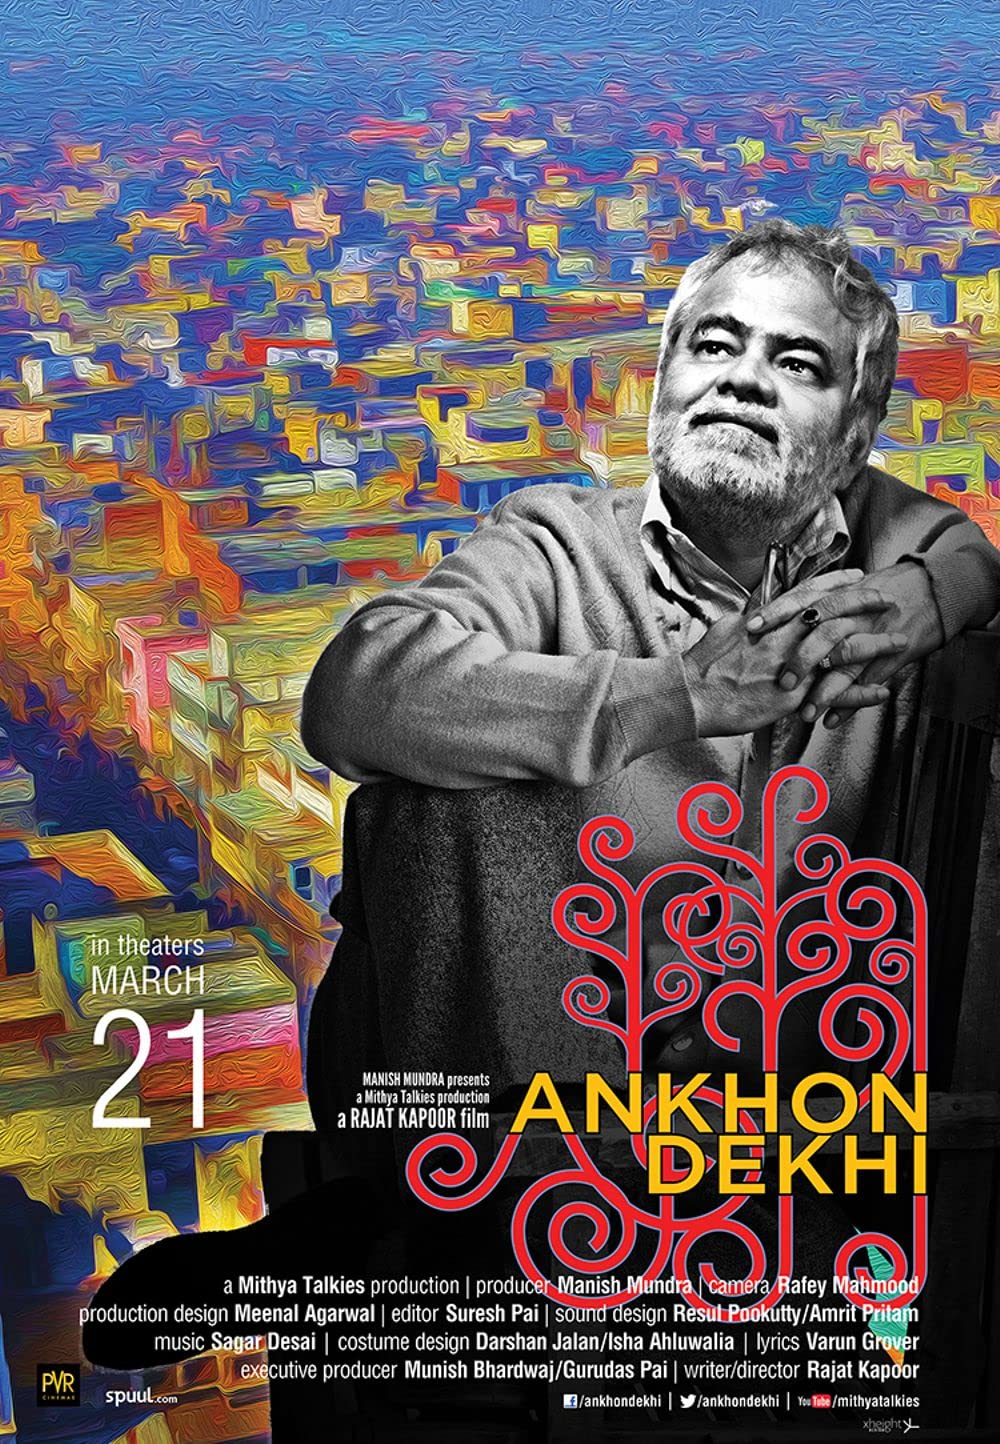 Ankhon Dekhi (2013) is one of the underrated Hindi movies